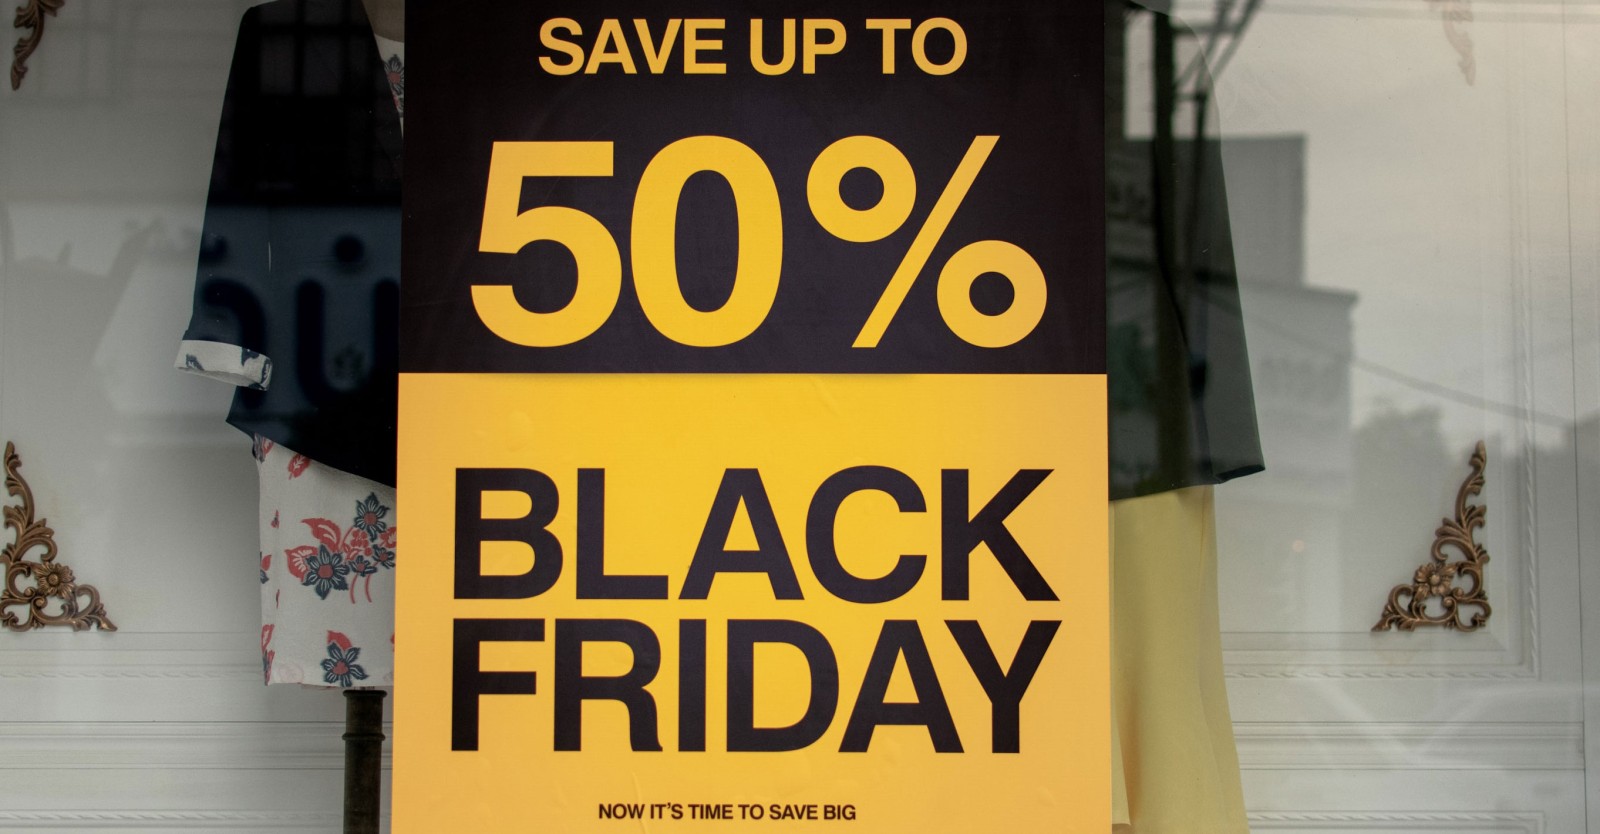 Black and yellow poster in a shop window advertising Black Friday